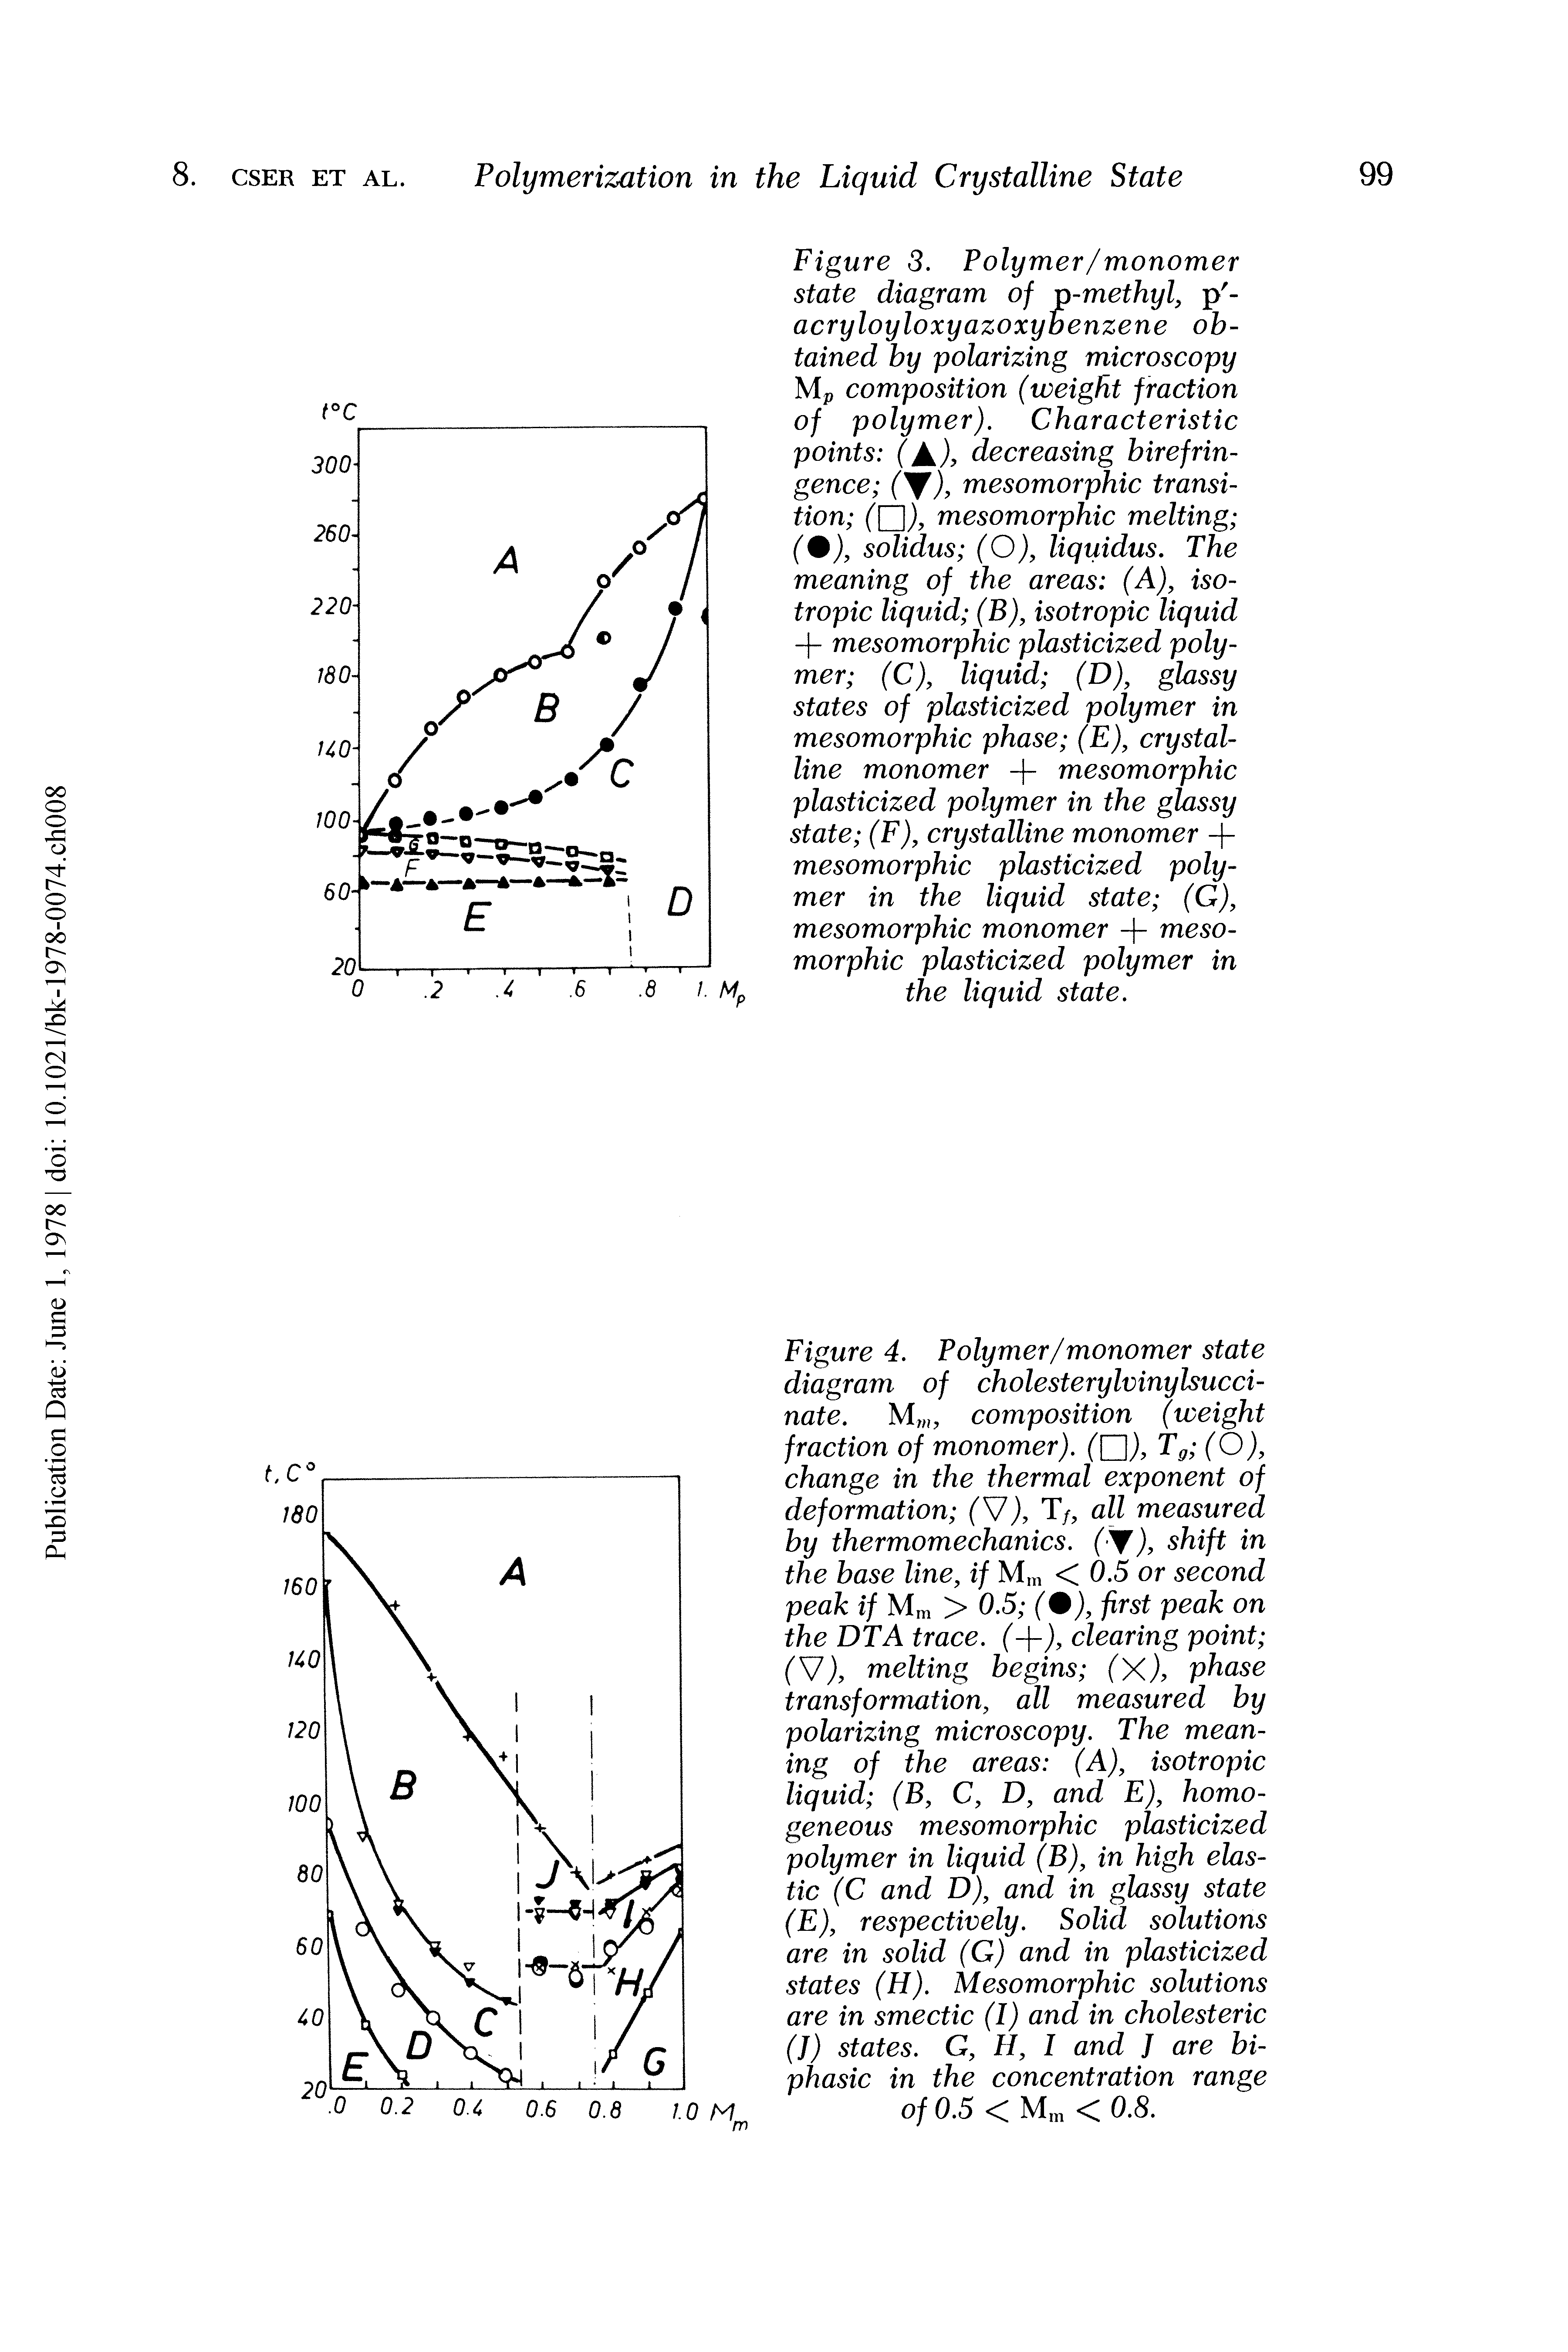 Figure 3. Polymer/monomer state diagram of p-methyl, p -acryloyloxyazoxybenzene obtained by polarizing microscopy Mp composition (weight fraction of polymer). Characteristic points ( ), decreasing birefringence CY), mesomorphic transition mesomorphic melting (%), solidus (O), liquidus. The meaning of the areas (A), isotropic liquid (B), isotropic liquid -j- mesomorphic plasticized polymer (C), liquid (D), glassy states of plasticized polymer in mesomorphic phase (E), crystalline monomer -f mesomorphic plasticized polymer in the glassy state (F), crystalline monomer -j-mesomorphic plasticized polymer in the liquid state (G), mesomorphic monomer -f mesomorphic plasticized polymer in the liquid state.